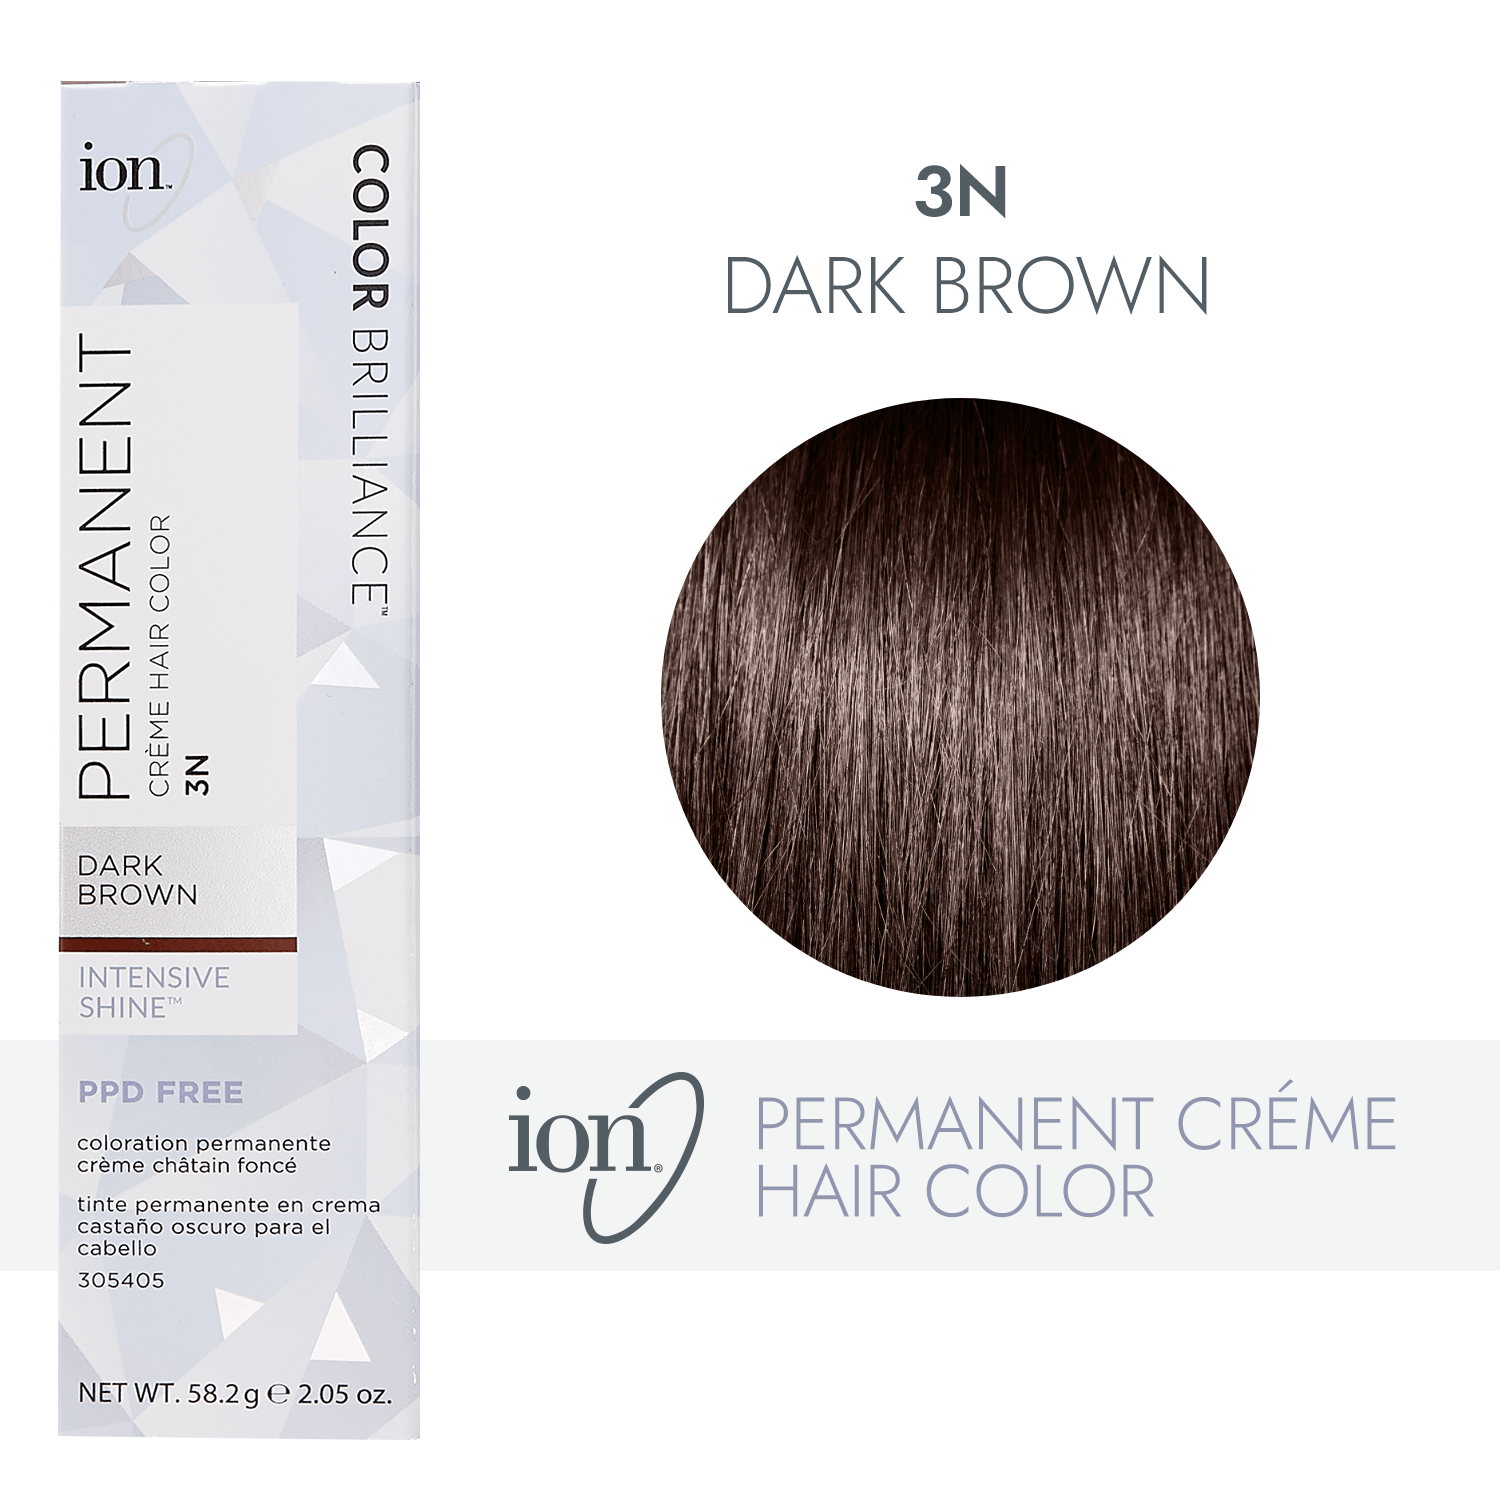 Permanent creme hair color ion color brilliance color chart - ryteprofessor